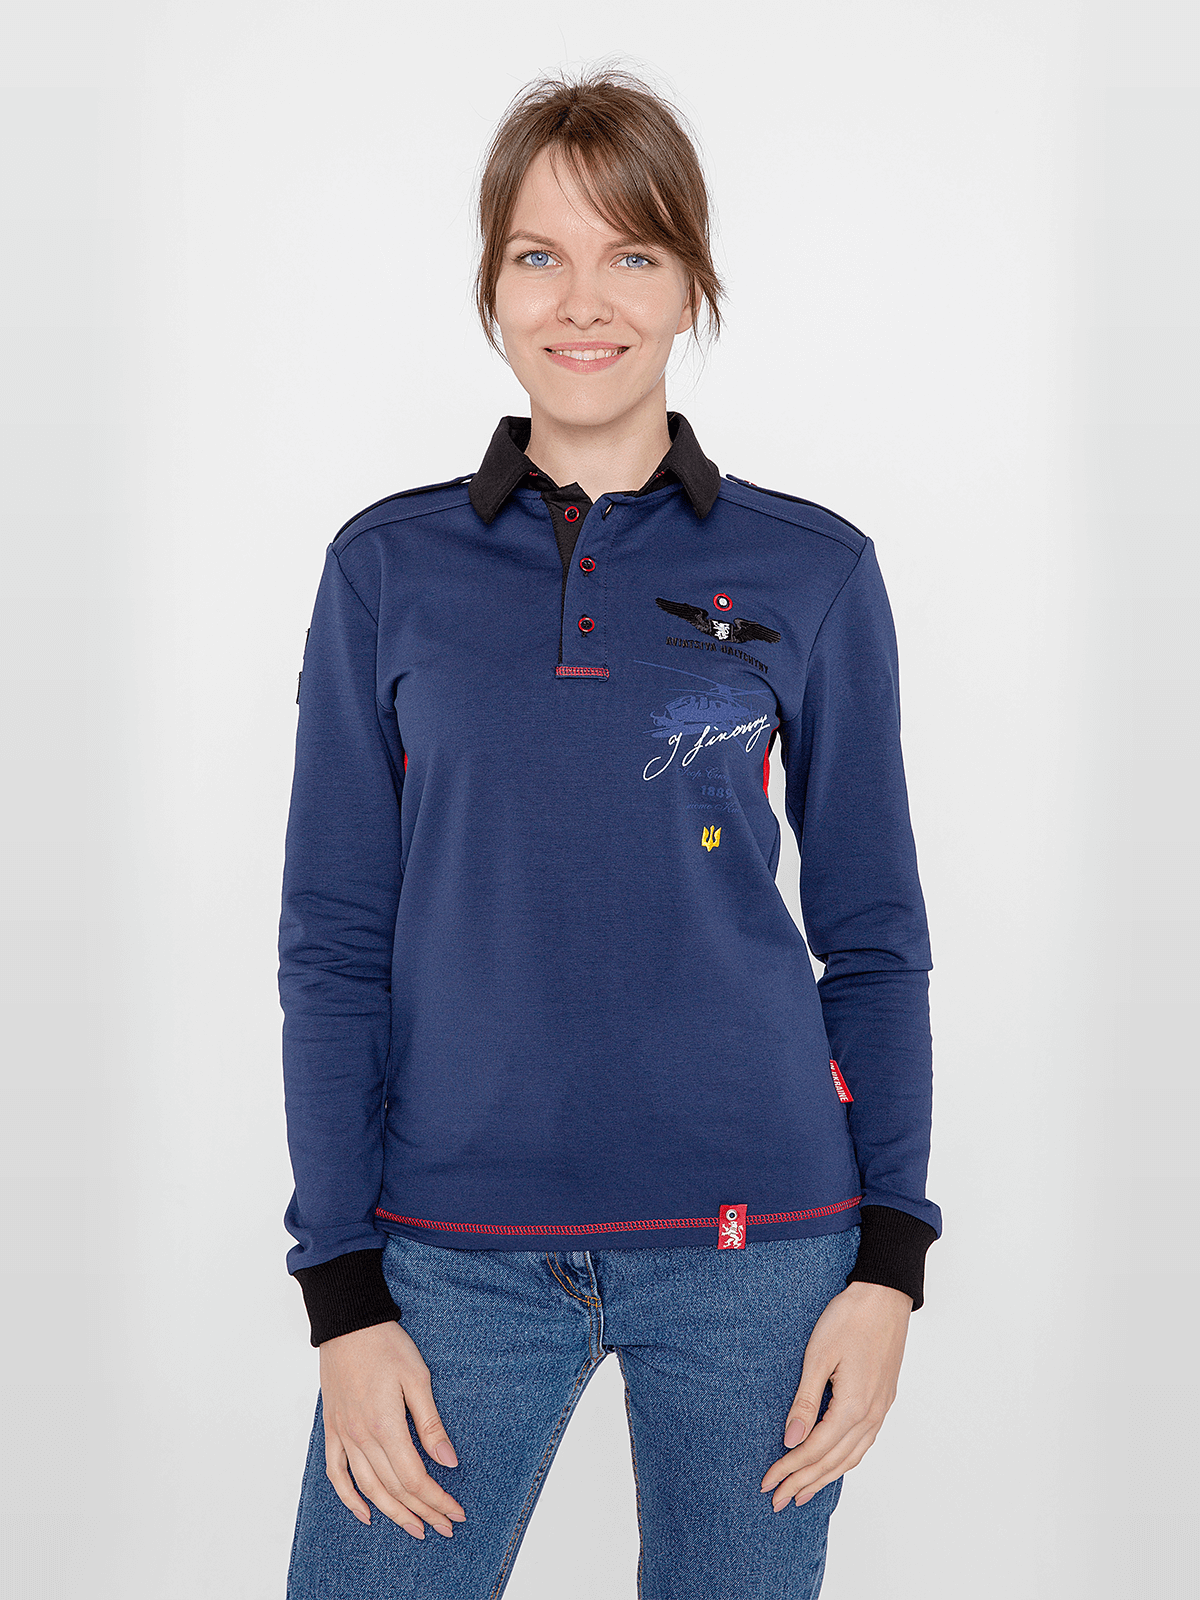 Women's Polo Long Sikorsky. Color navy blue. .